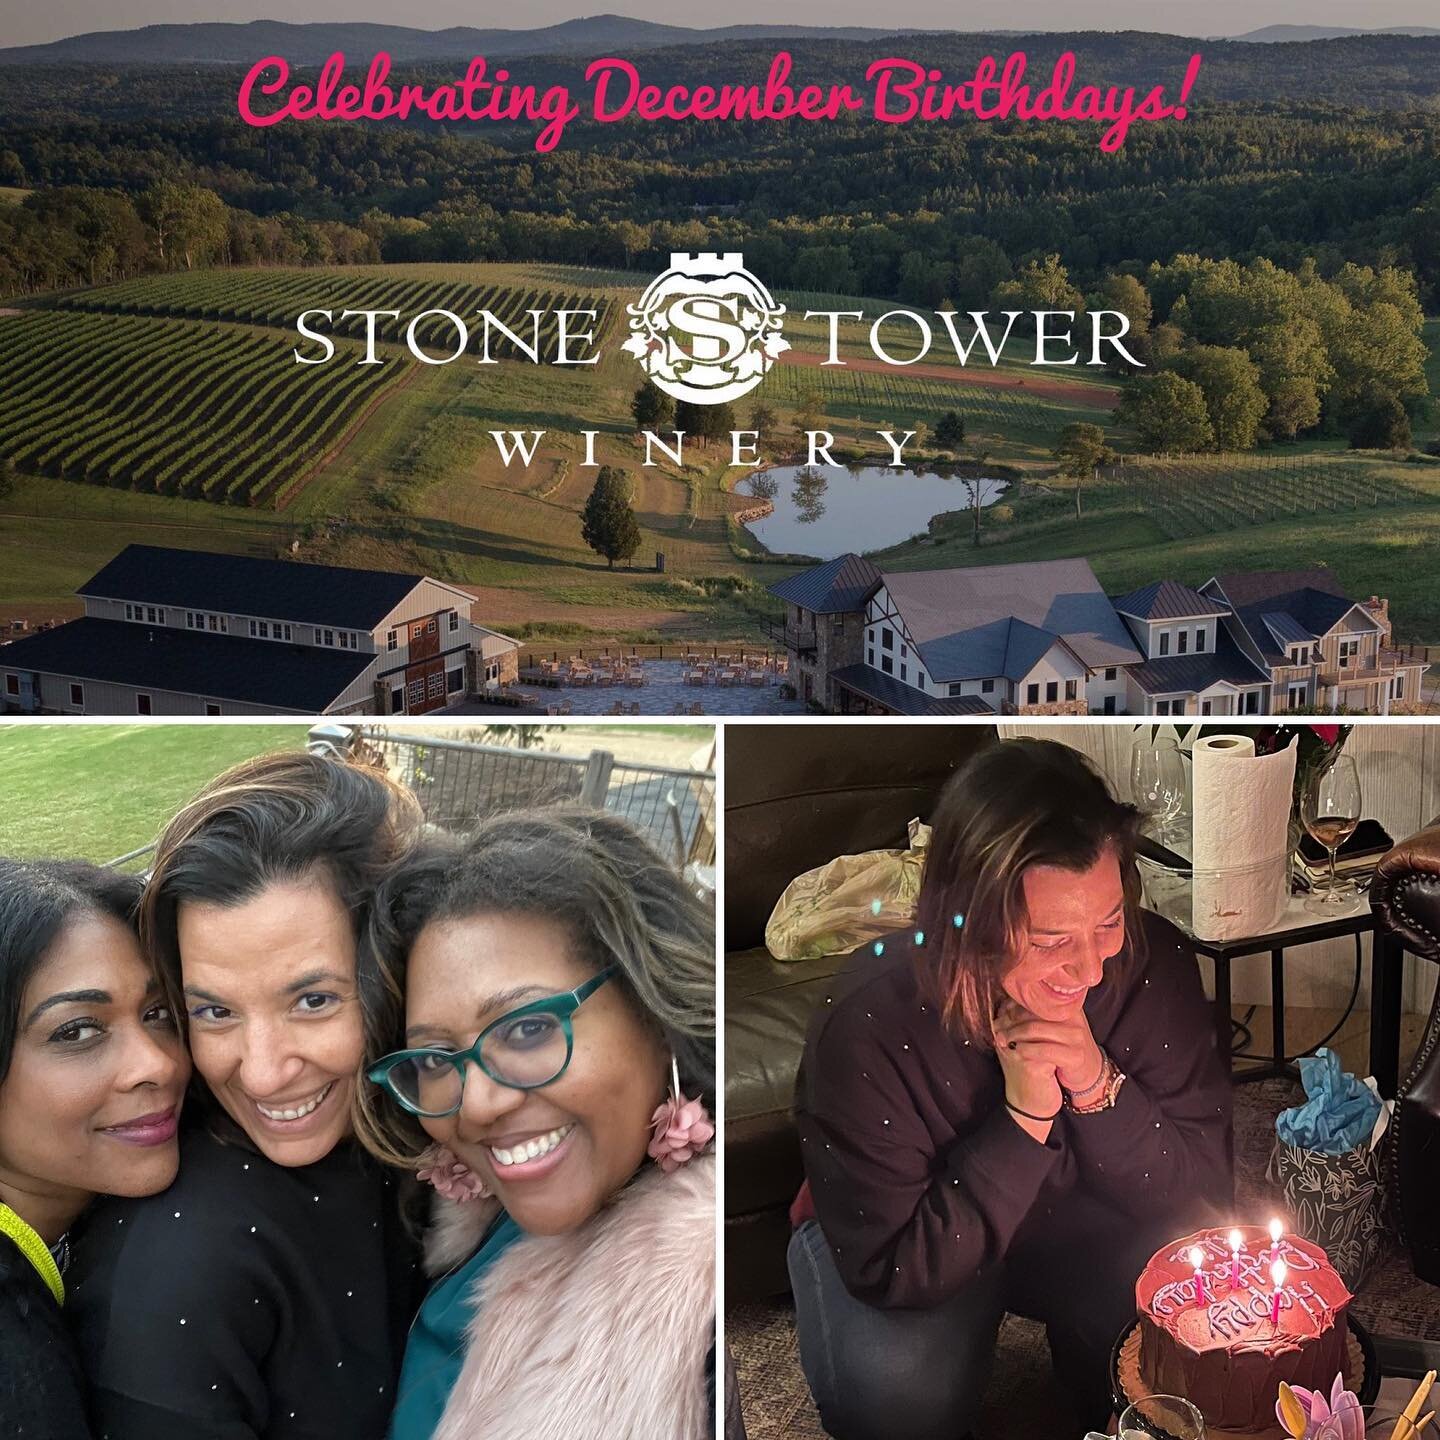 Kicking off our Dec birthday celebrations. First up, Alia in VA wine country! Happy birthday @asub03!! Cheers to your new adventures! #Hangingw/thegyrls